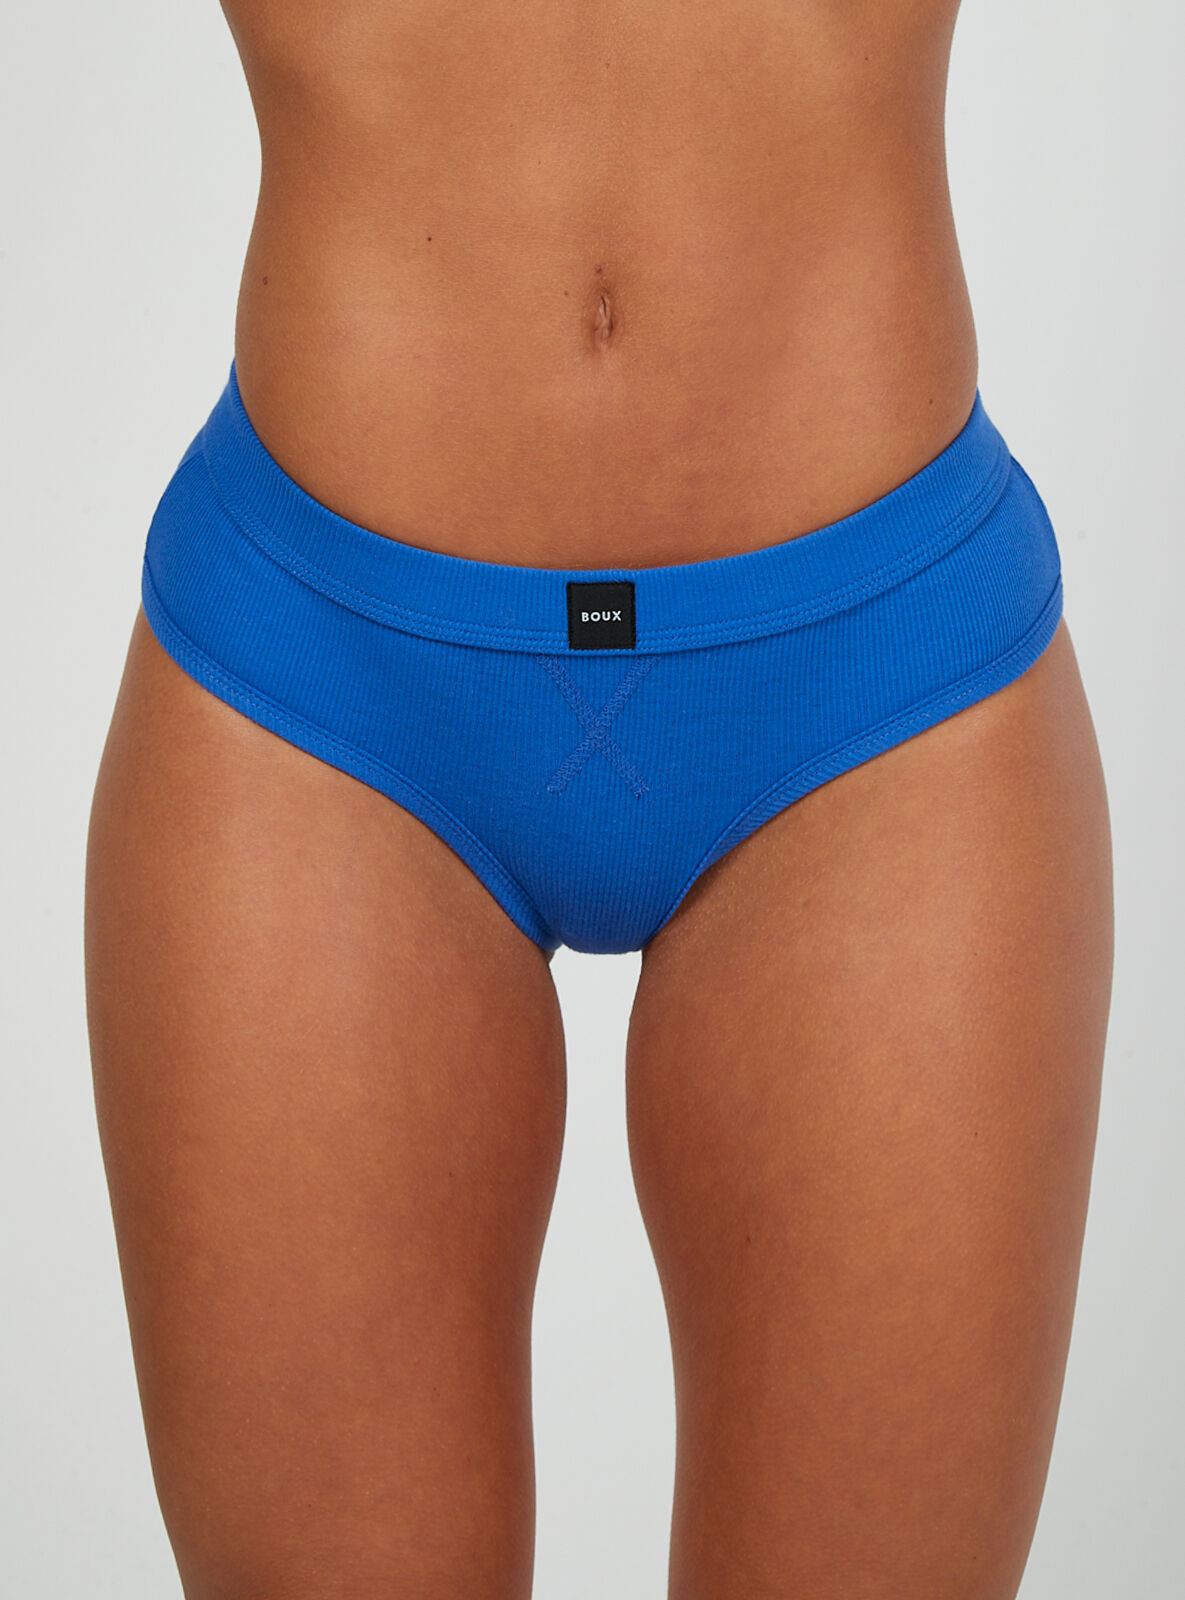 Boux Avenue Nell ribbed cheeky shorts - Cobalt Blue - 10